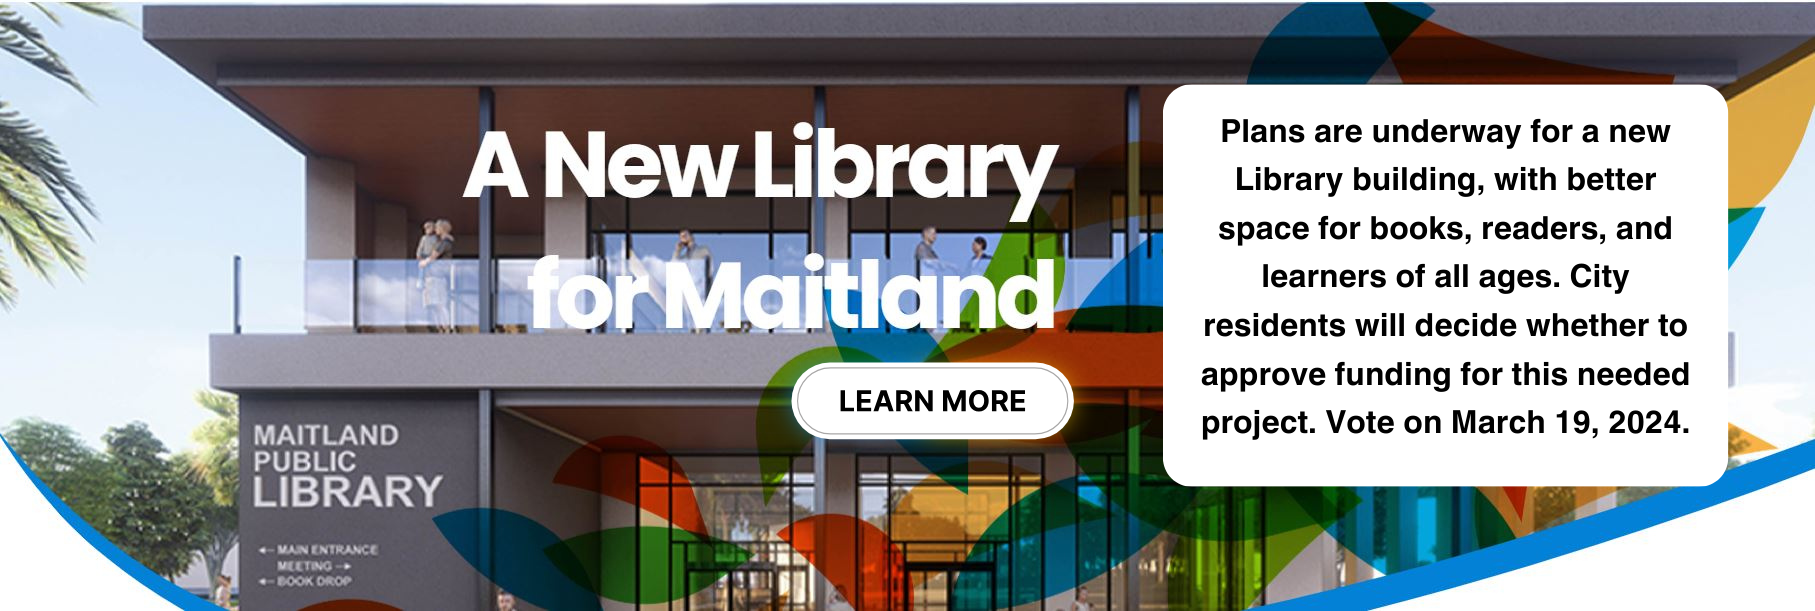 Plans are underway for a new Library building, with better space for books, readers, and learners of all ages. City residents will decide whether to approve funding for this needed project. Vote on March 19, 2024. Click here to learn more.